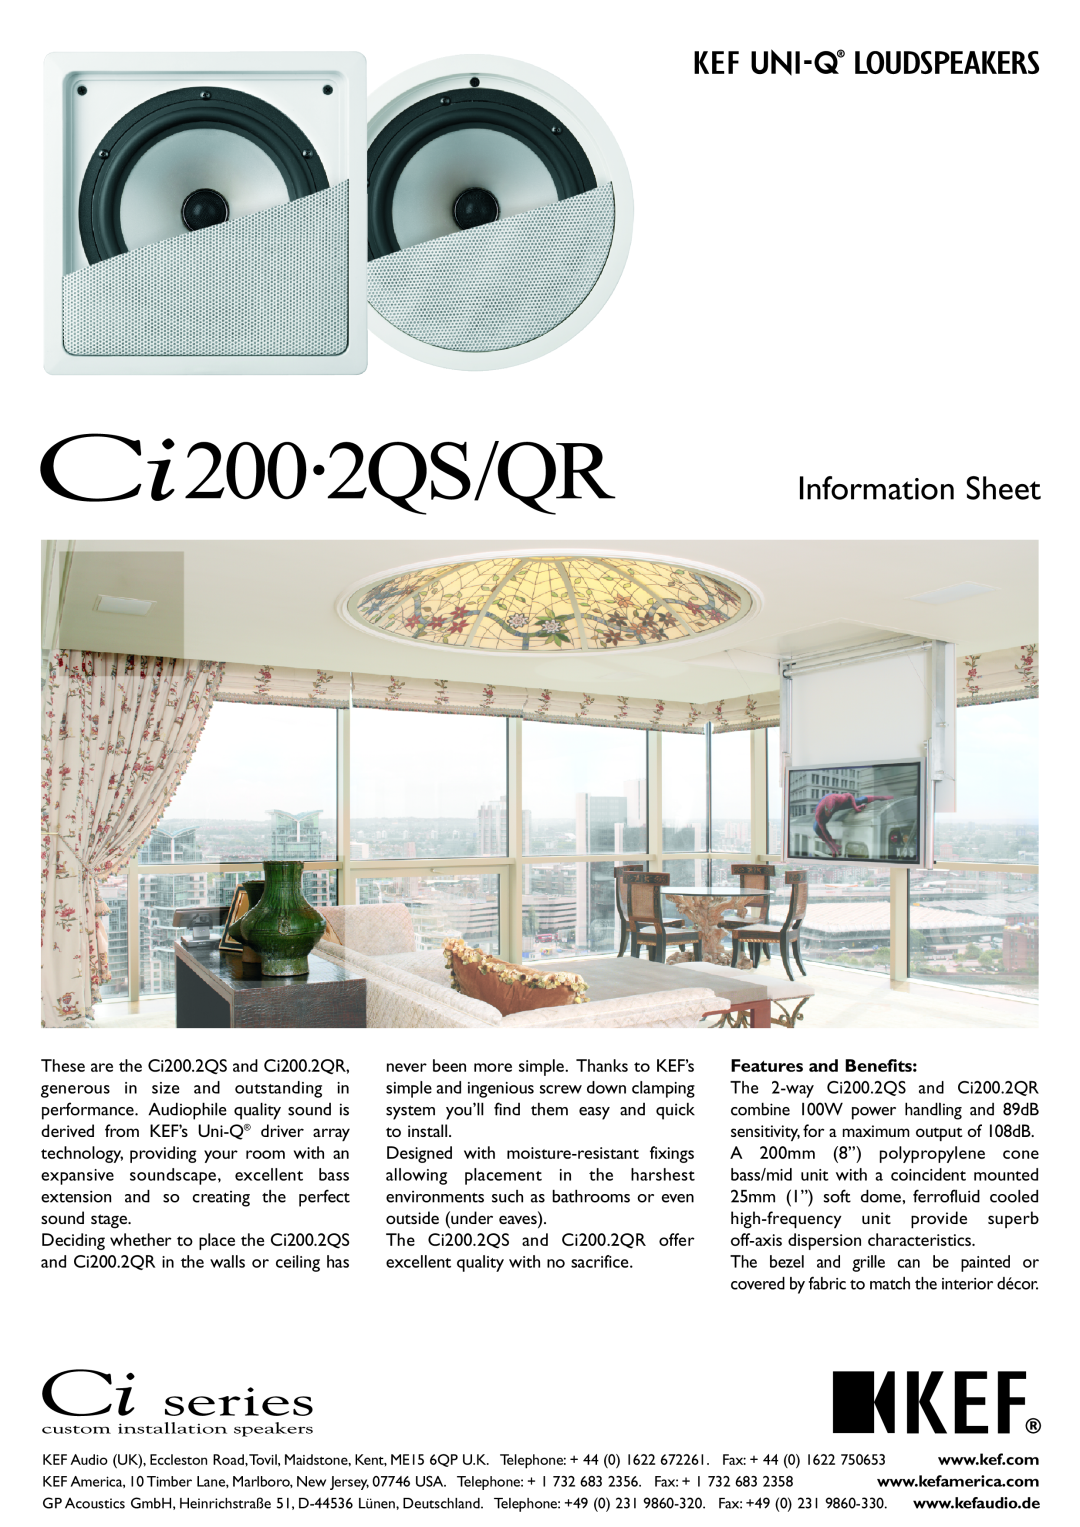 KEF Audio Ci200.2QR, Ci 200.2QS manual Features and Benefits, Information Sheet 